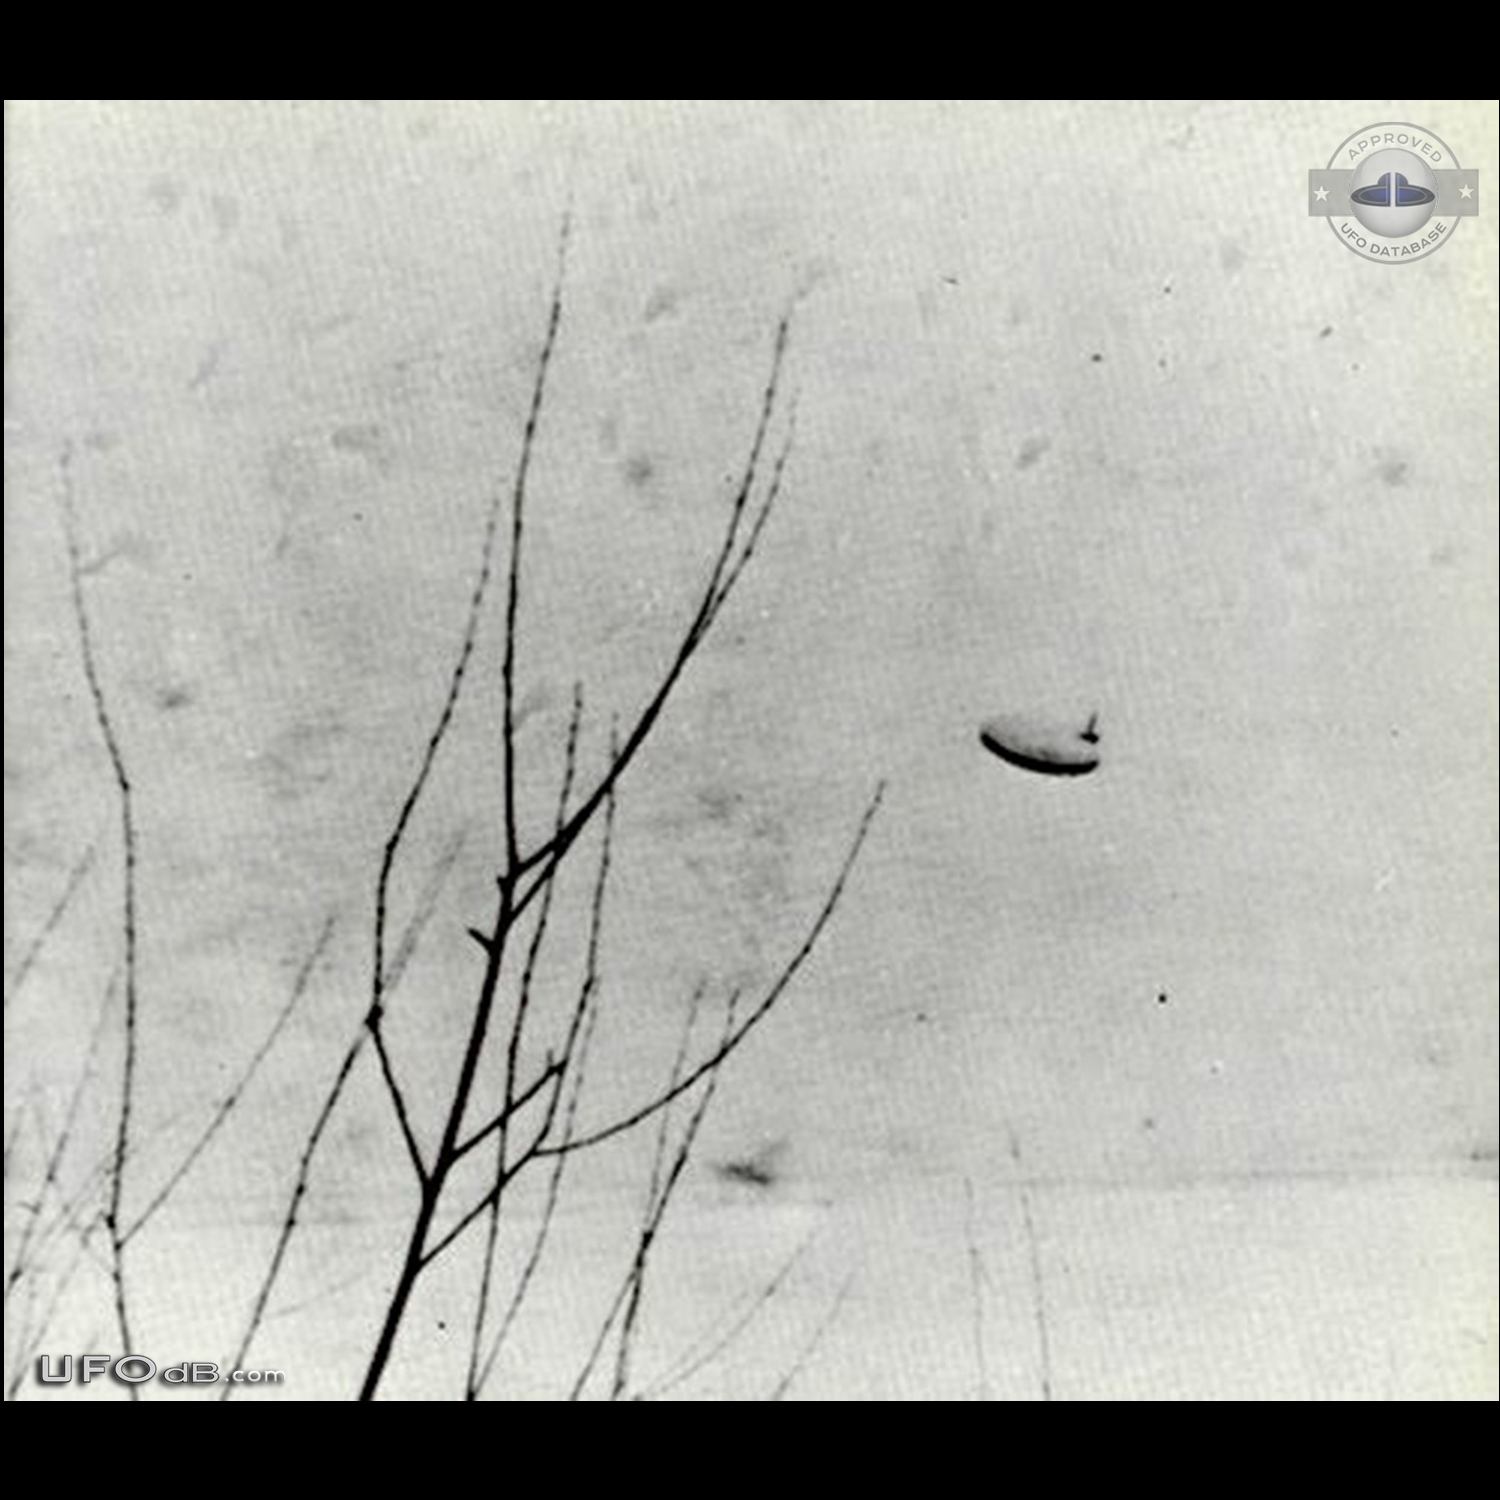 Teenages Boys see Saucer UFO in Lake St Clair Michigan USA 1967 UFO Picture #584-1